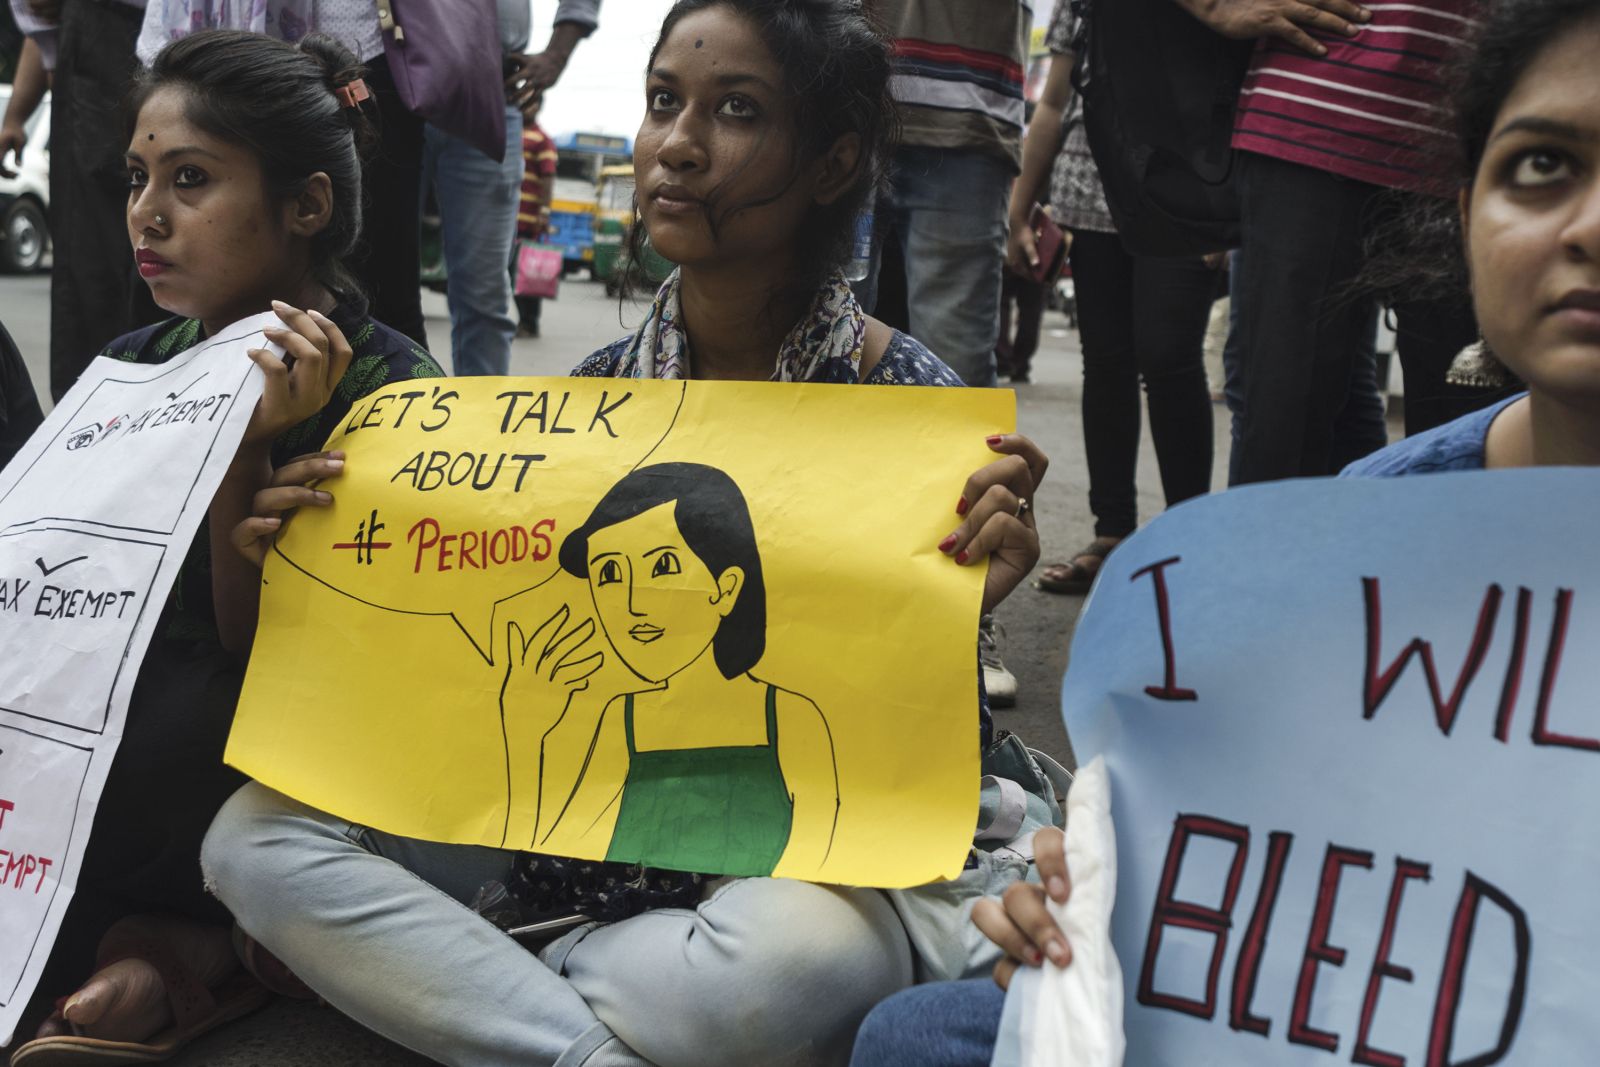 Women protest against the high cost of sanitary pads in Kolkata, India.